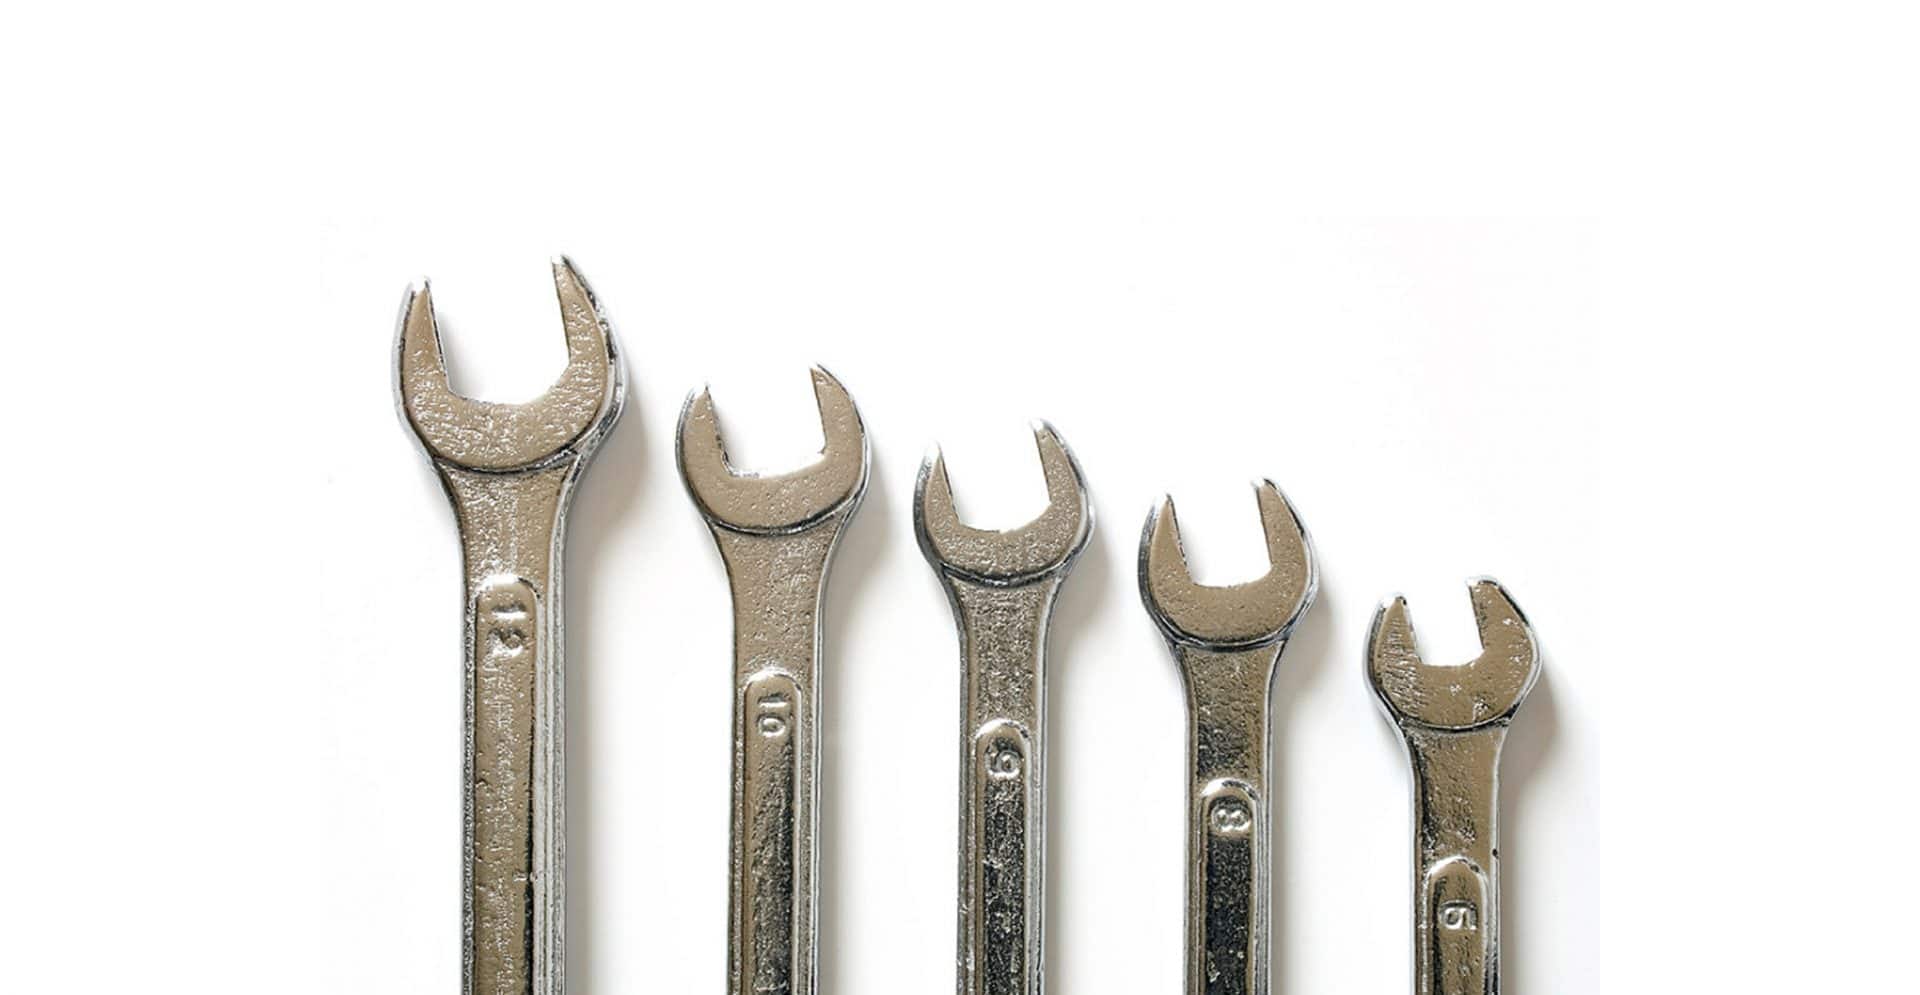 set of wrenches